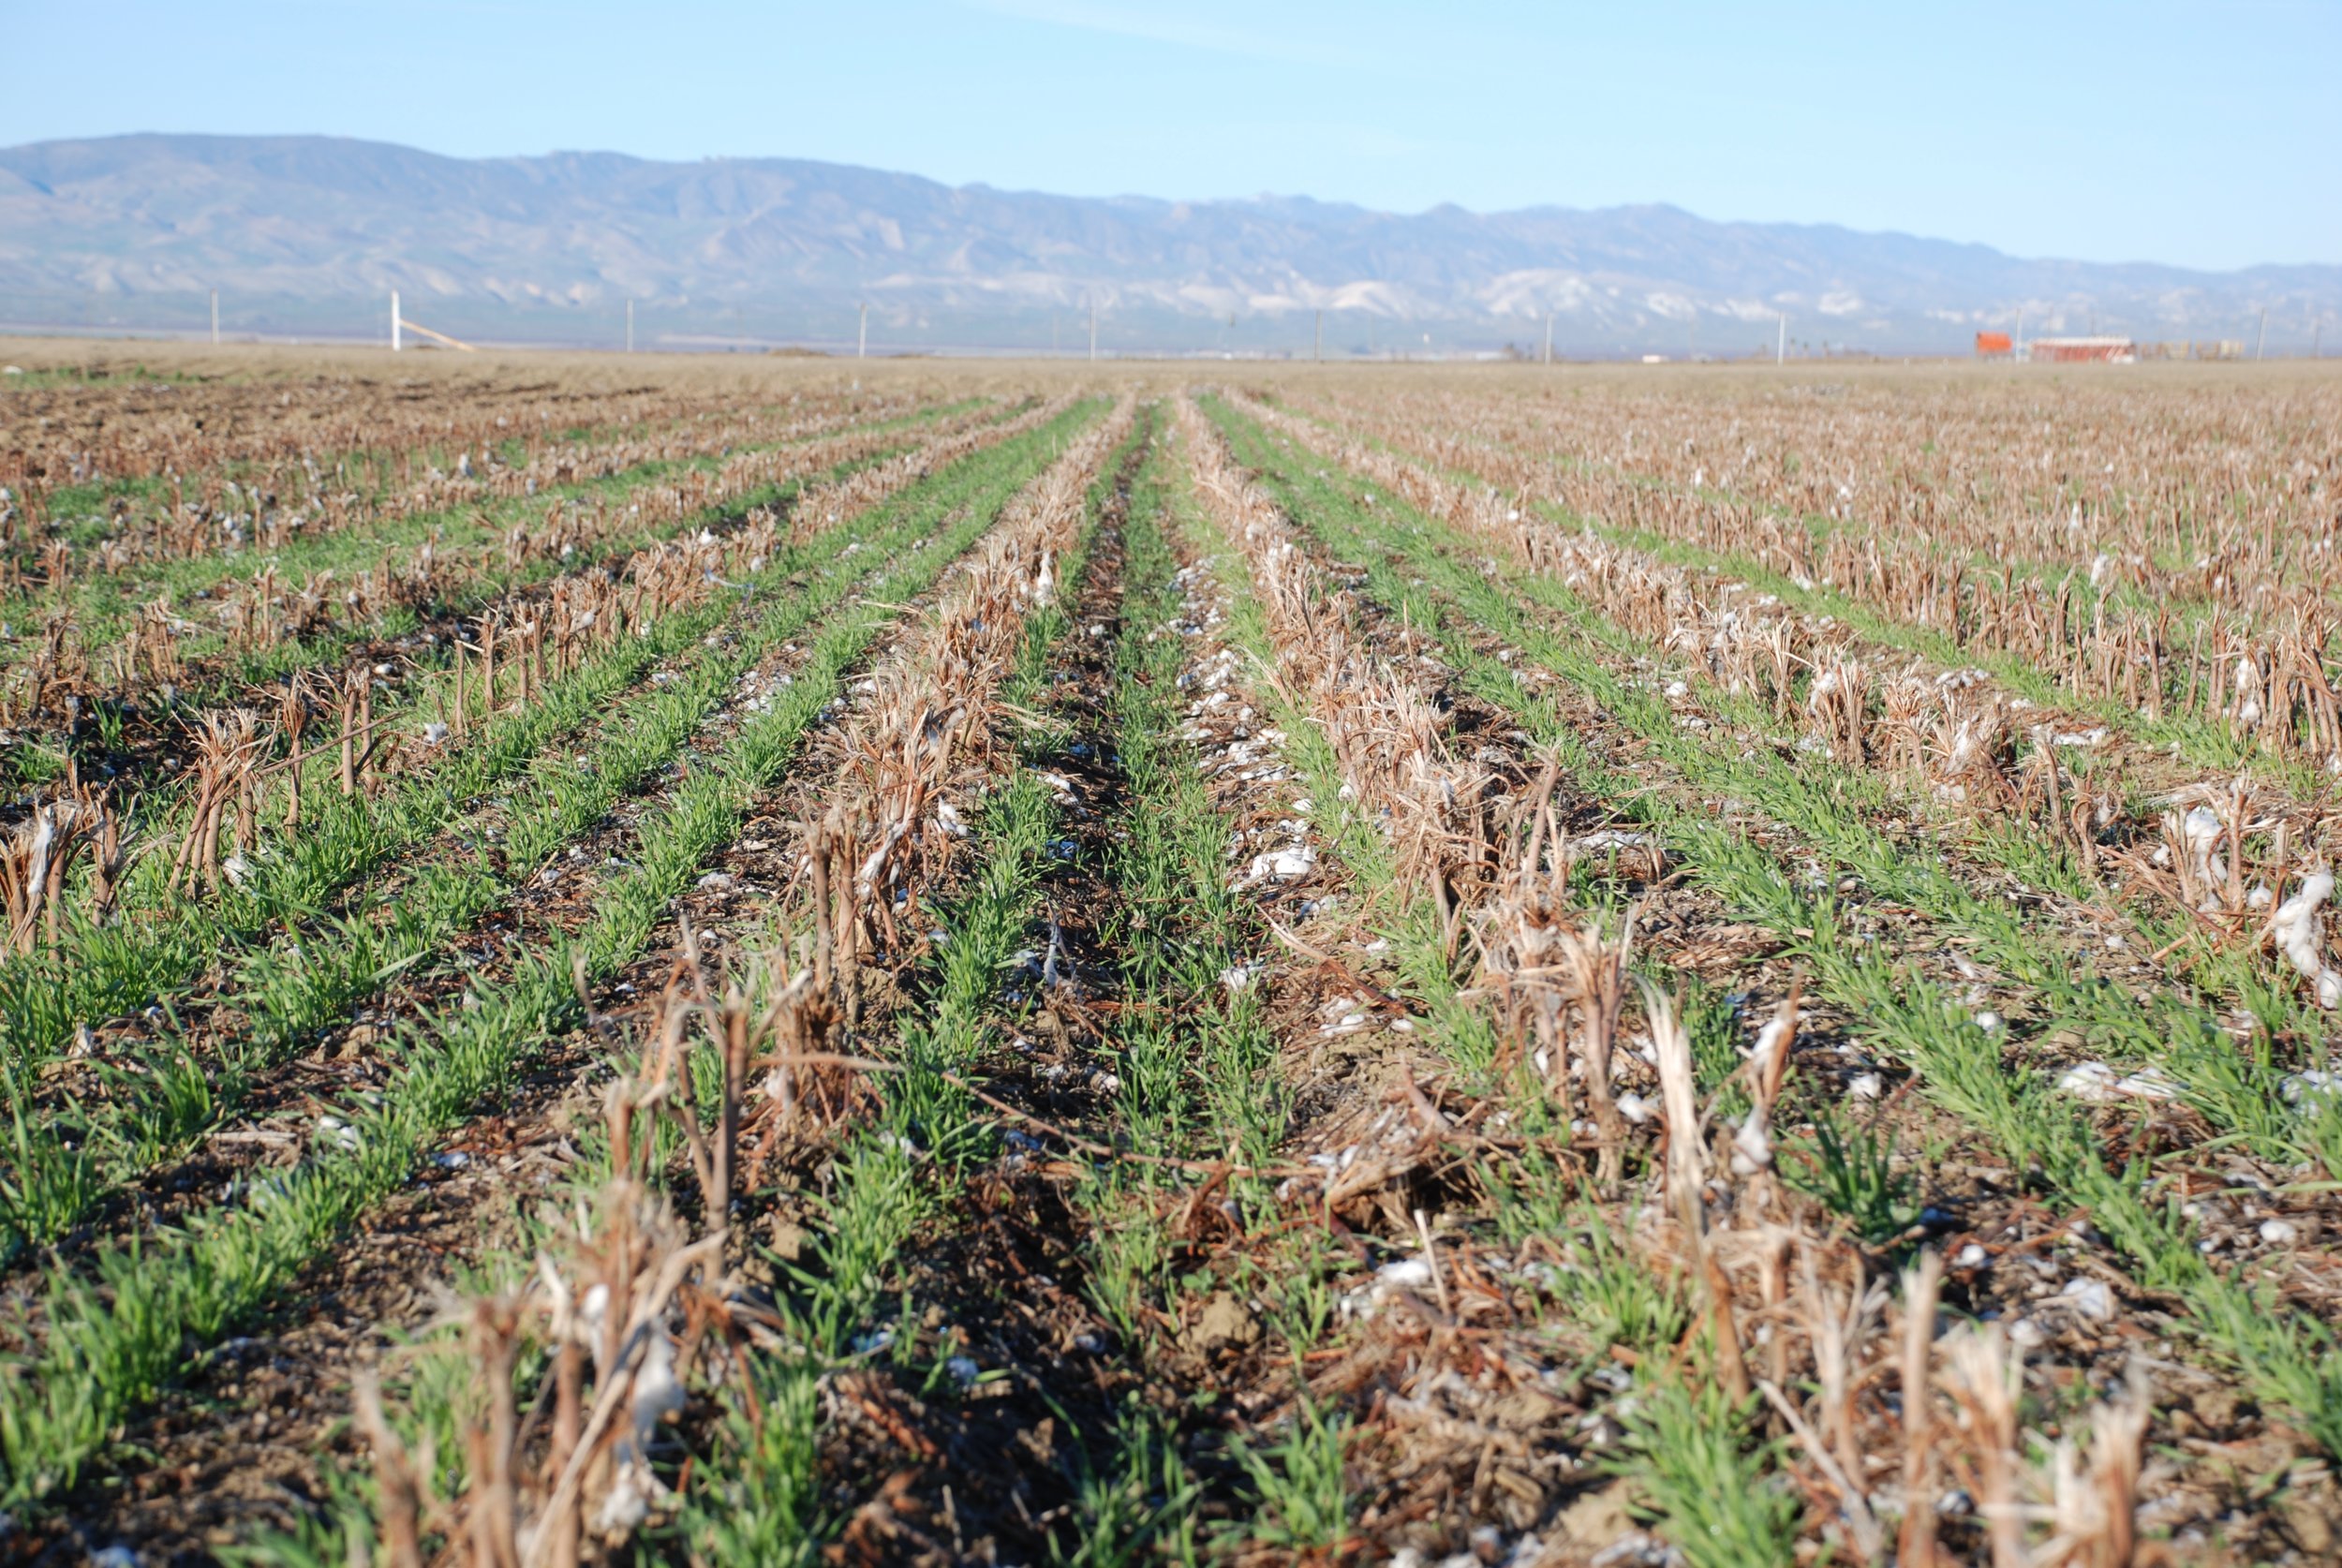 A cover crop growing in cotton and tomato residues in a no-till agricultural field. (Source: UC ANR)